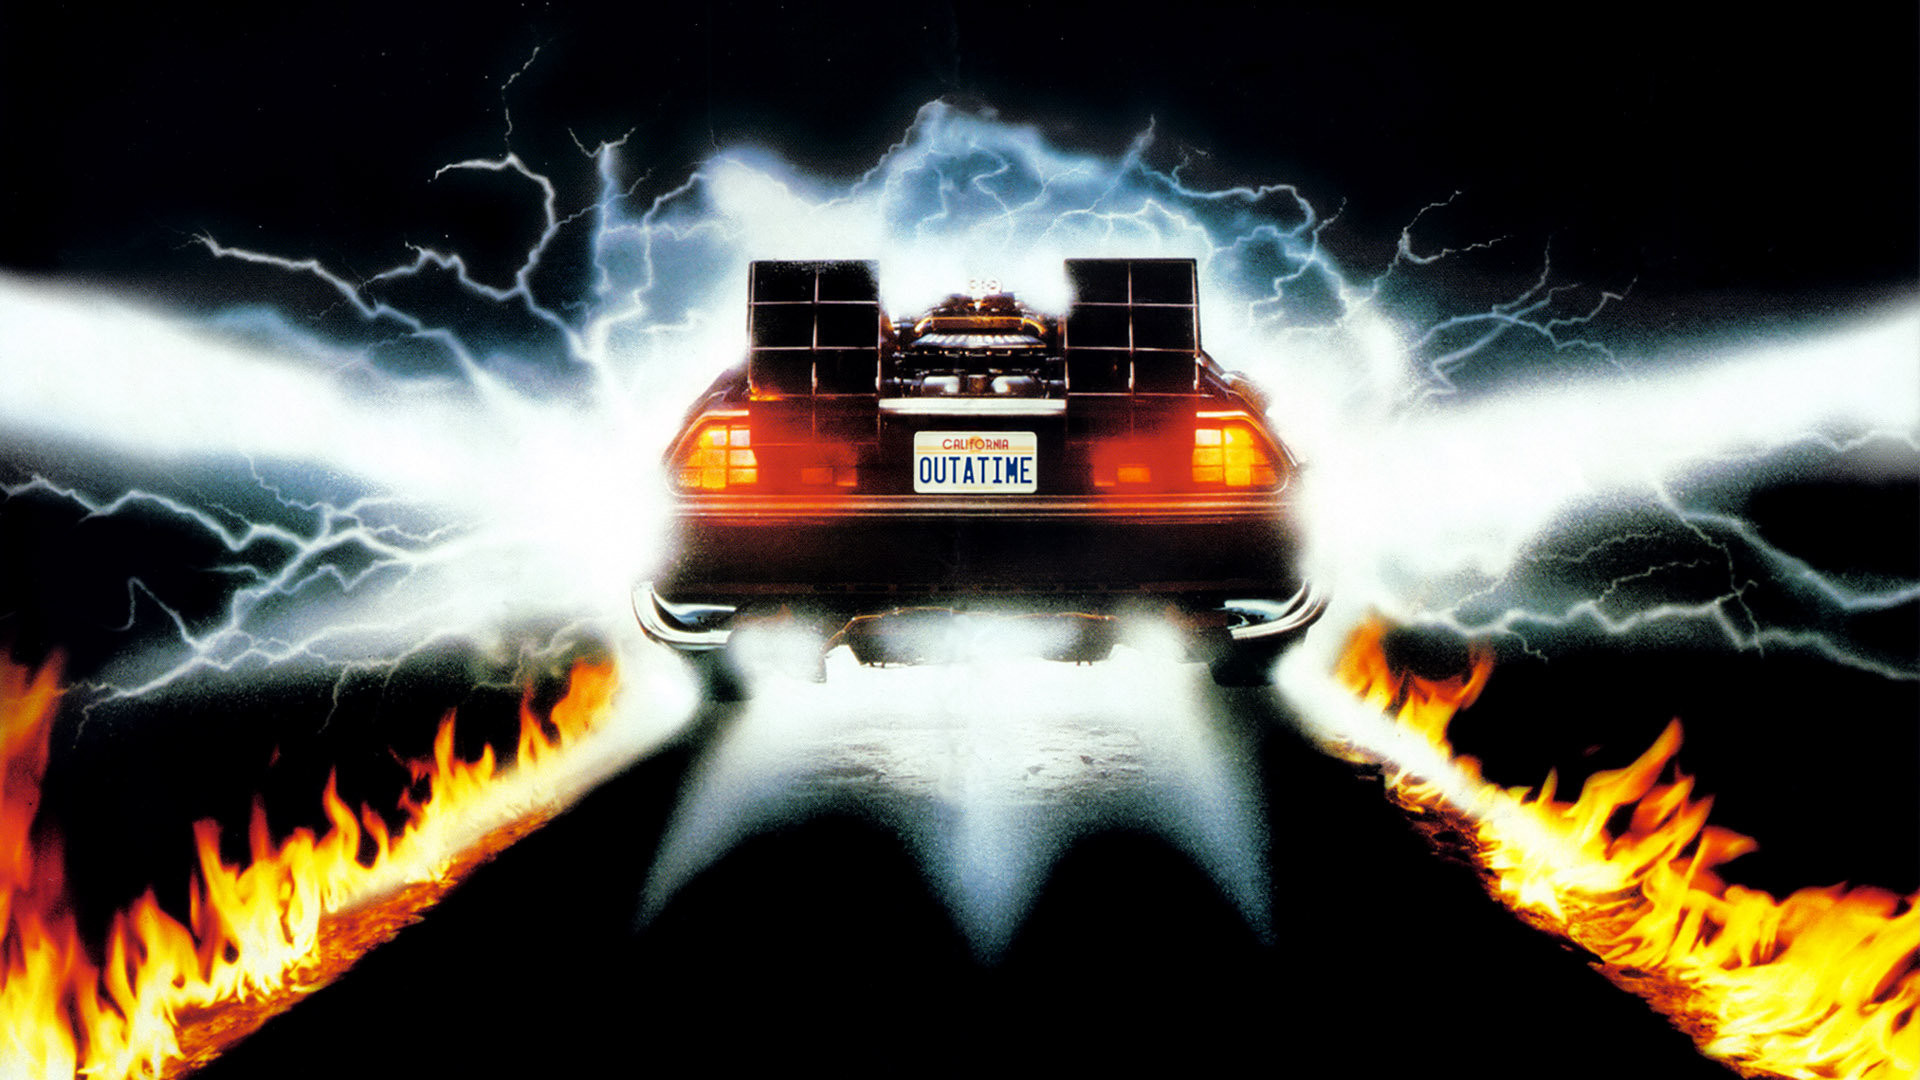 Back To The Future Part II: What Did It Get Right About 2015?